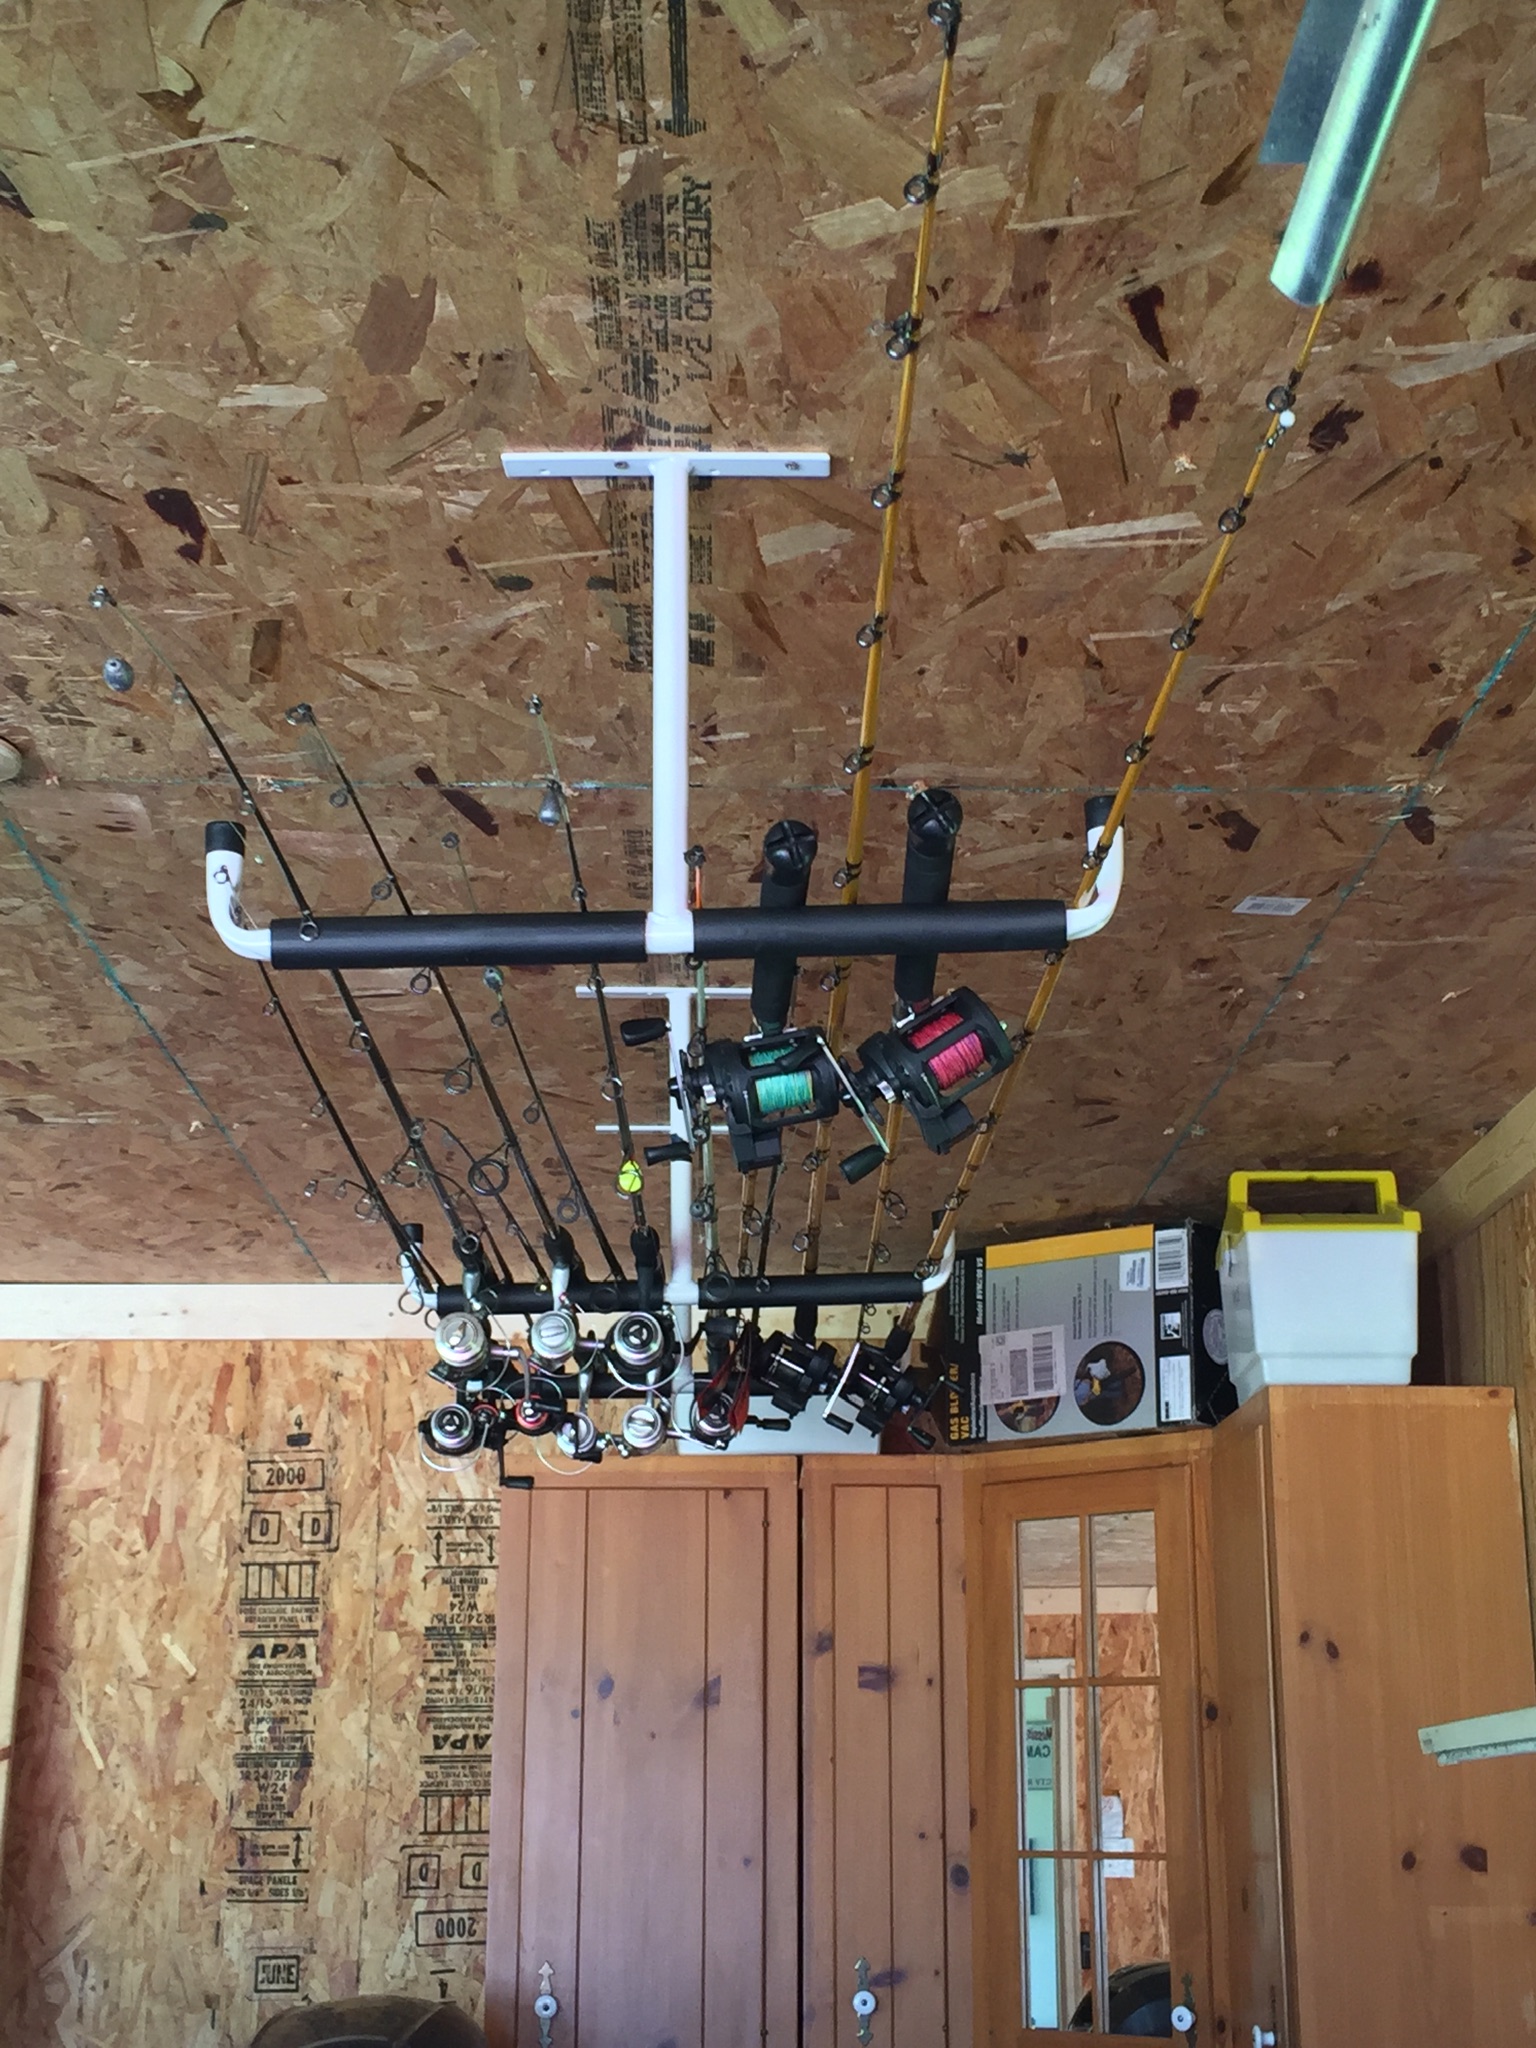 Storing fishing rods in the garage - General Discussion Forum - General  Discussion Forum